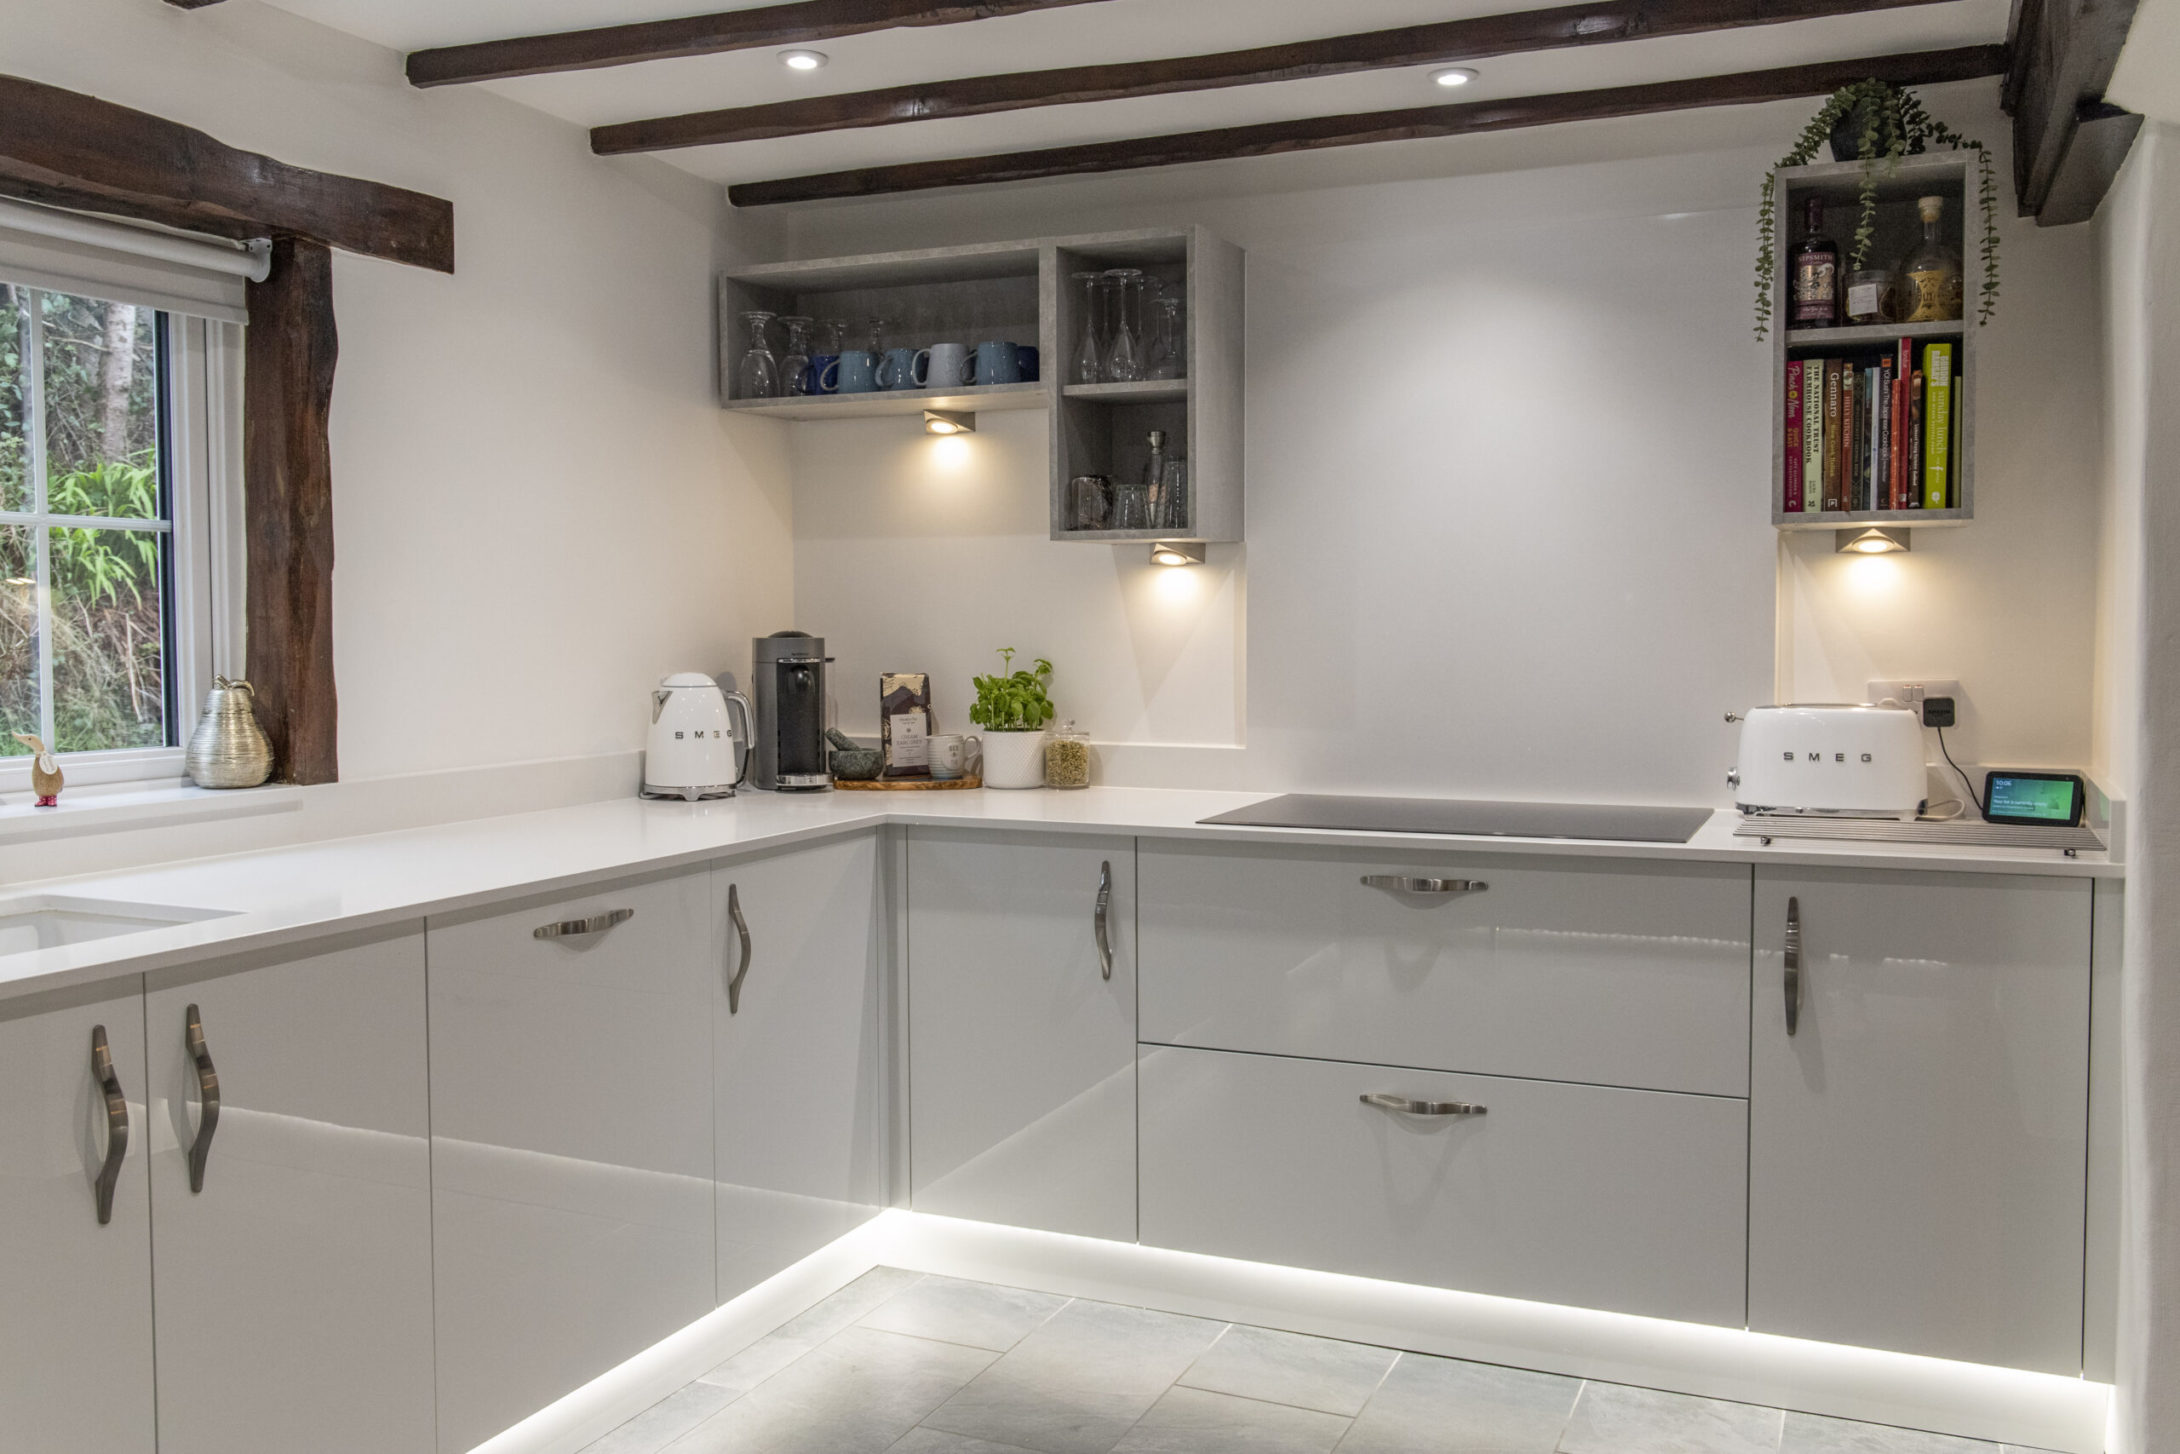 A kitchen showcasing our gloss doors in a soothing neutral colour scheme